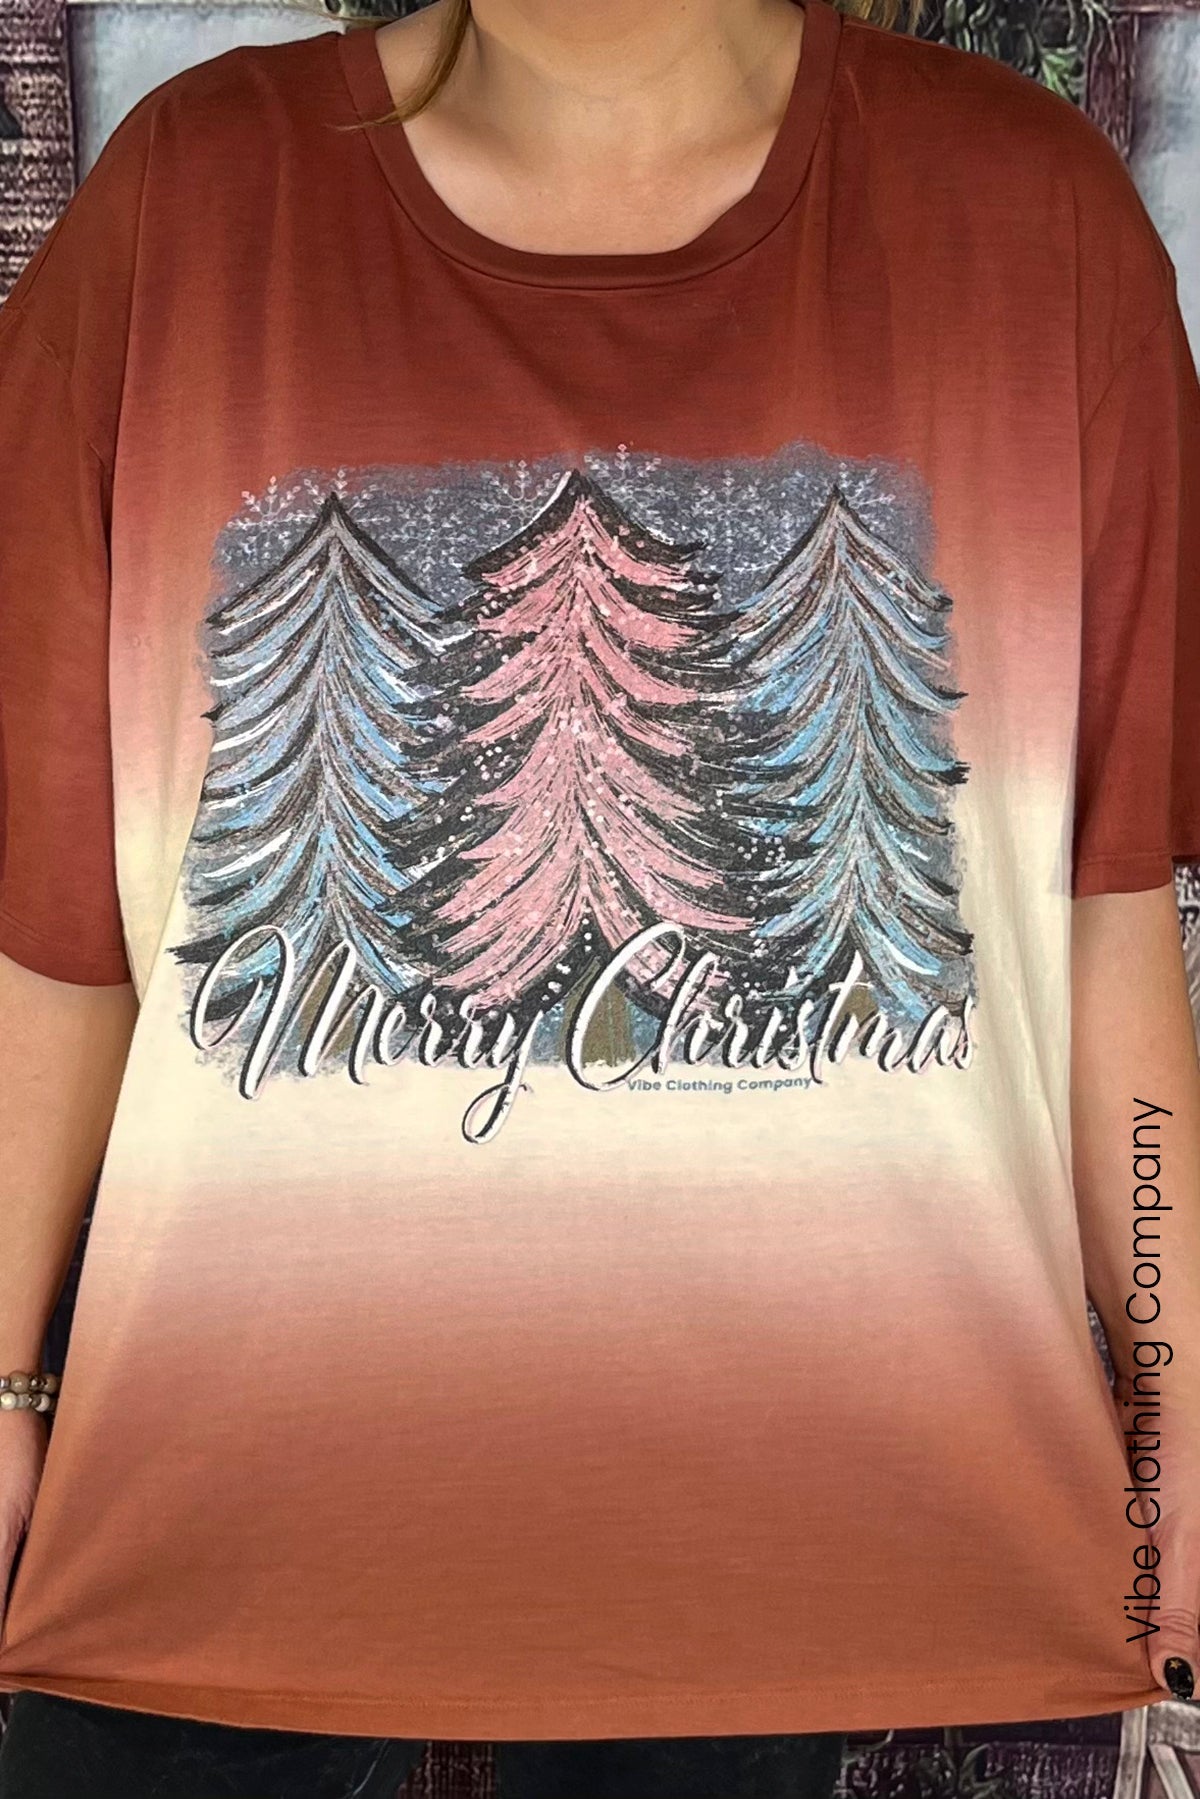 Shaggy Trees Graphic Top by Vibe Clothing